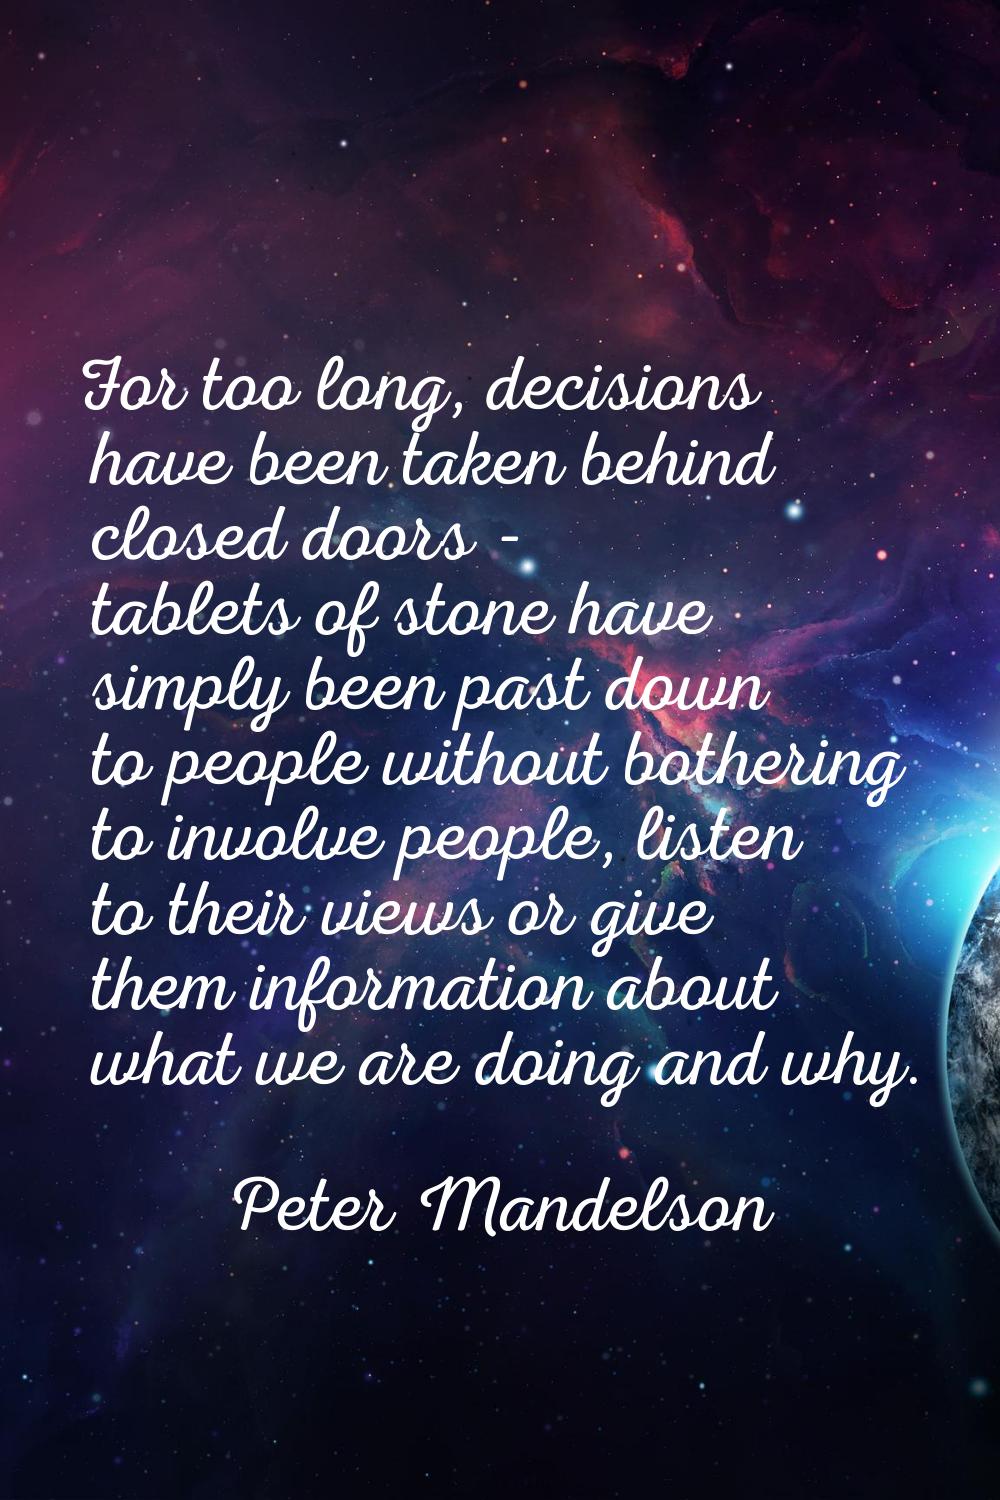 For too long, decisions have been taken behind closed doors - tablets of stone have simply been pas